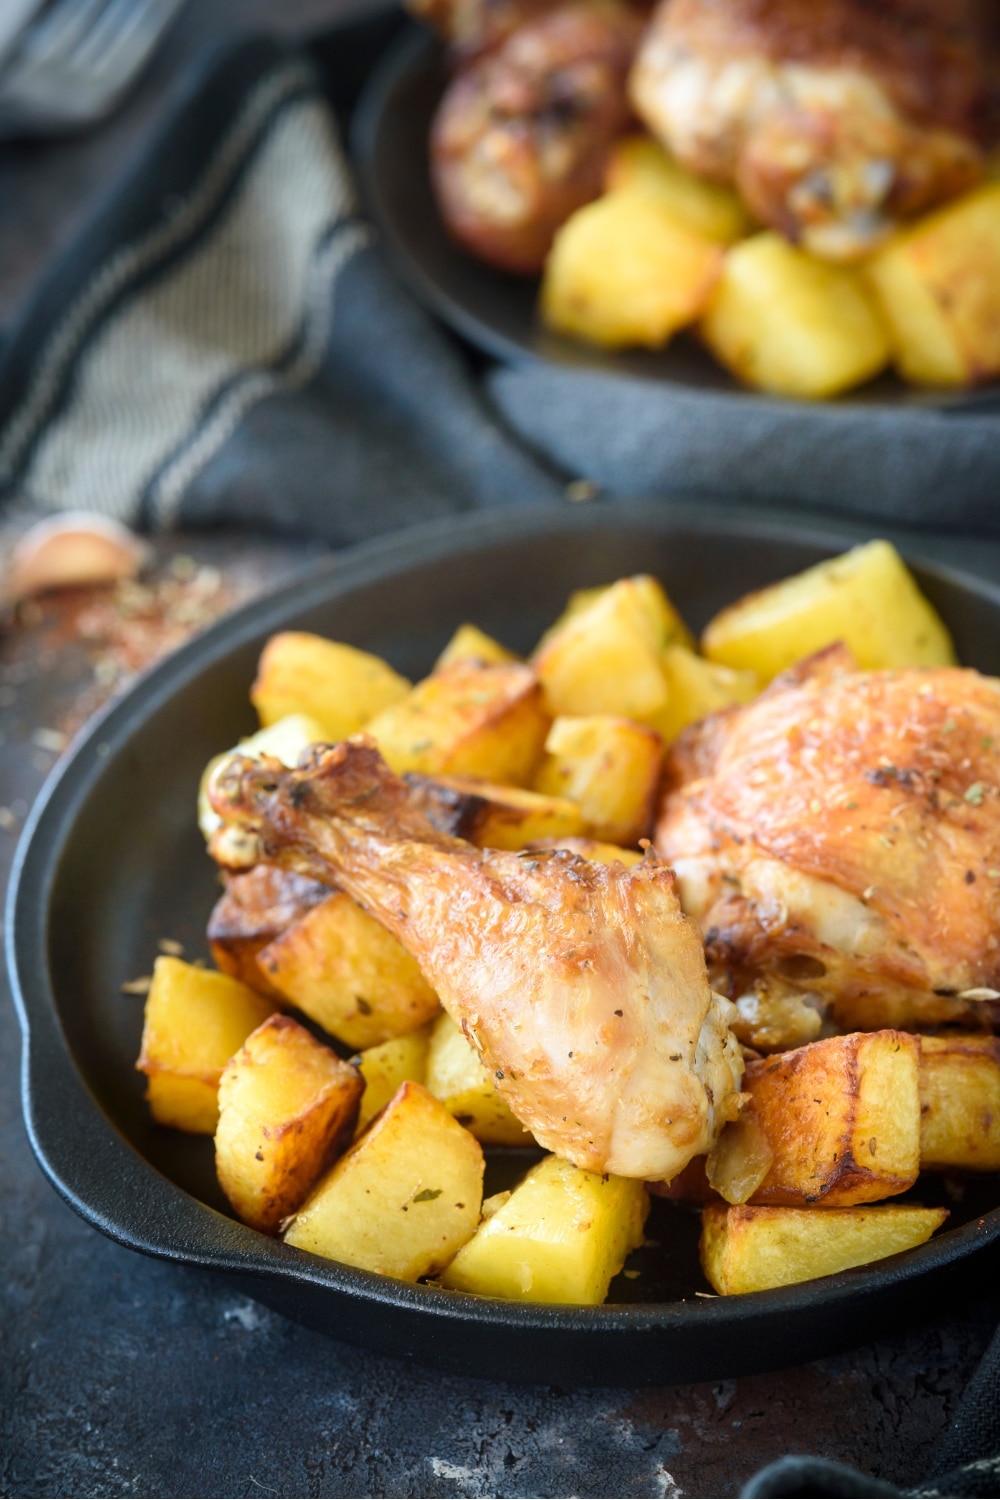 A chicken drumstick and potatoes on a plate.